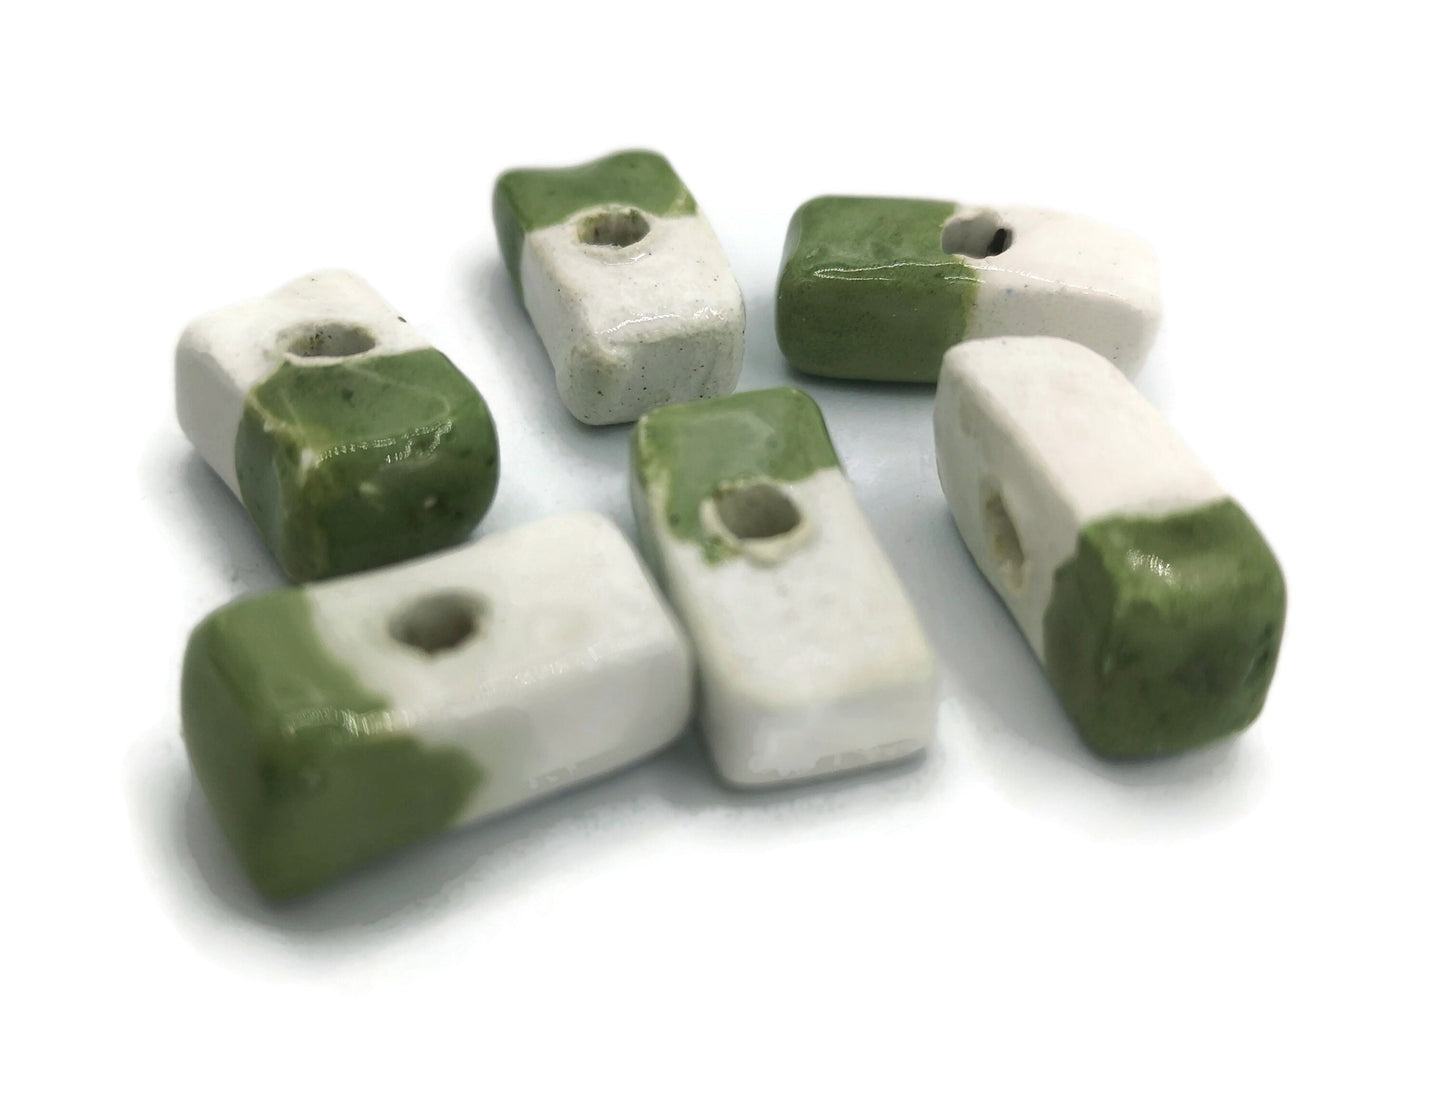 SPACER BEADS, RECTANGLE Bead, Ceramic Beads, Set Of 6 Flat Square Tile Beads For Jewelry Making, Decorative Unique Clay Beads For Crafts - Ceramica Ana Rafael